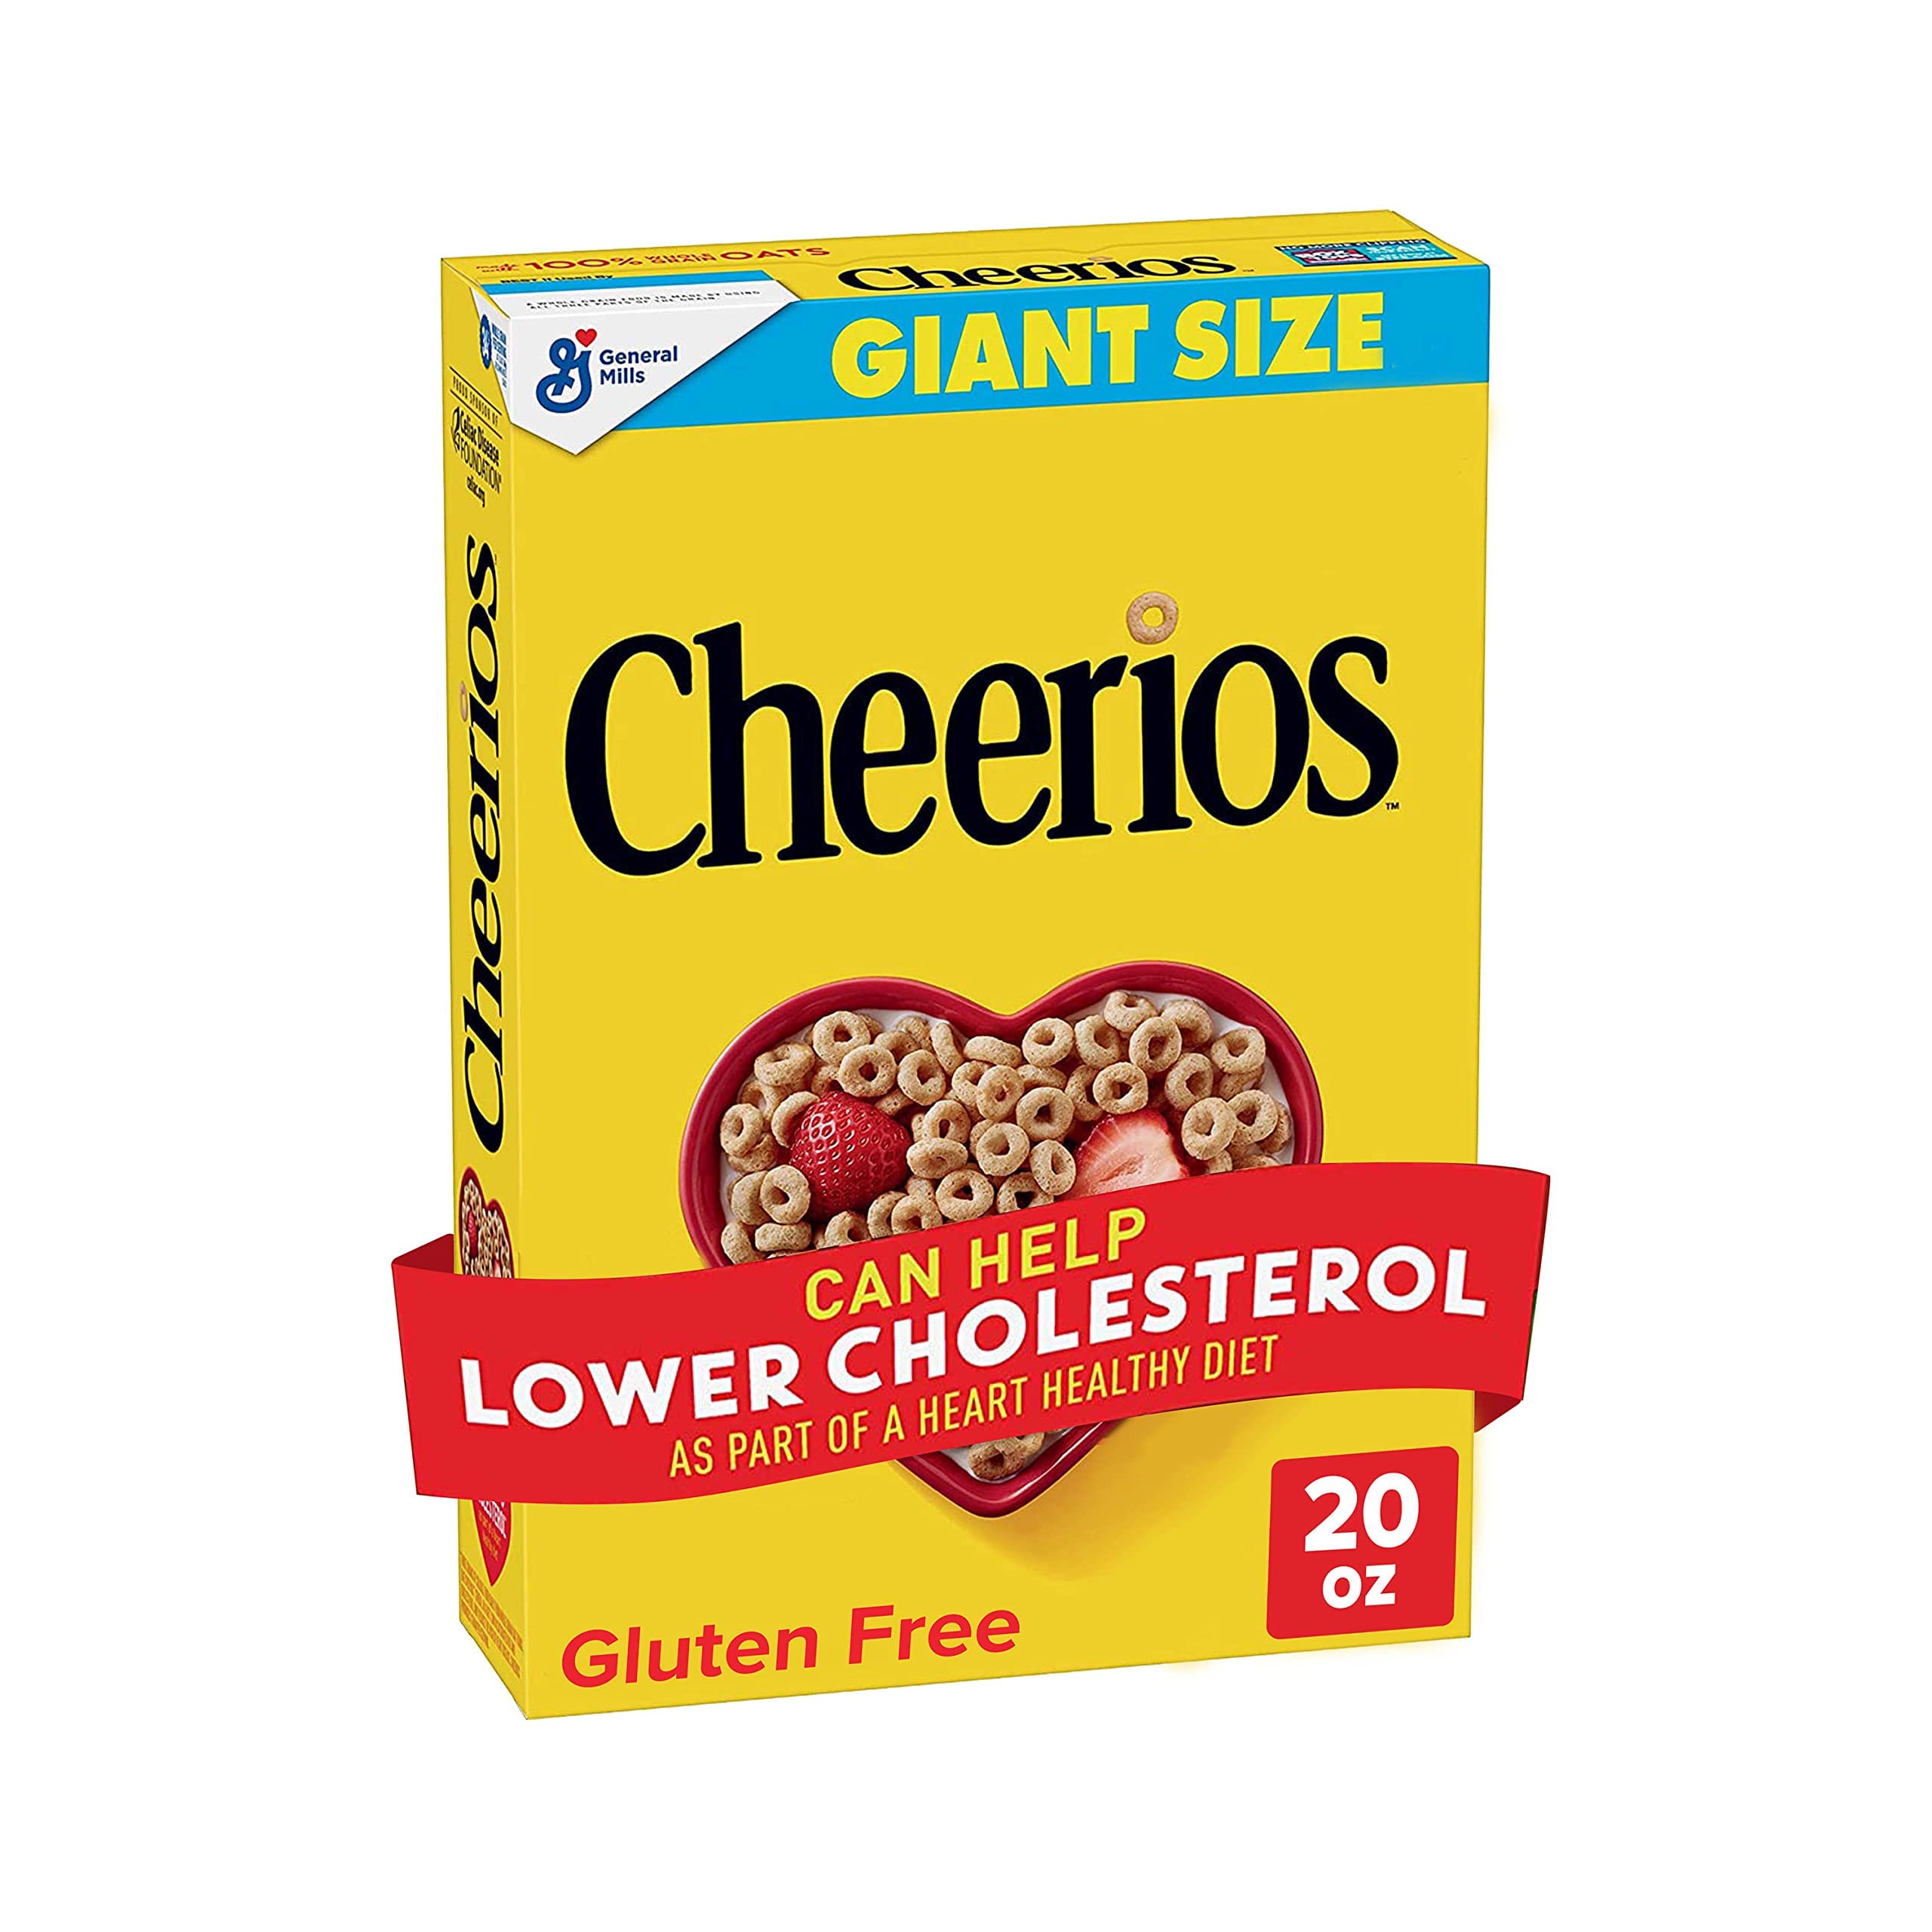 Cheerios Heart Healthy Cereal, Gluten Free Cereal with Whole Grain Oats, Giant Size, 20 OZ